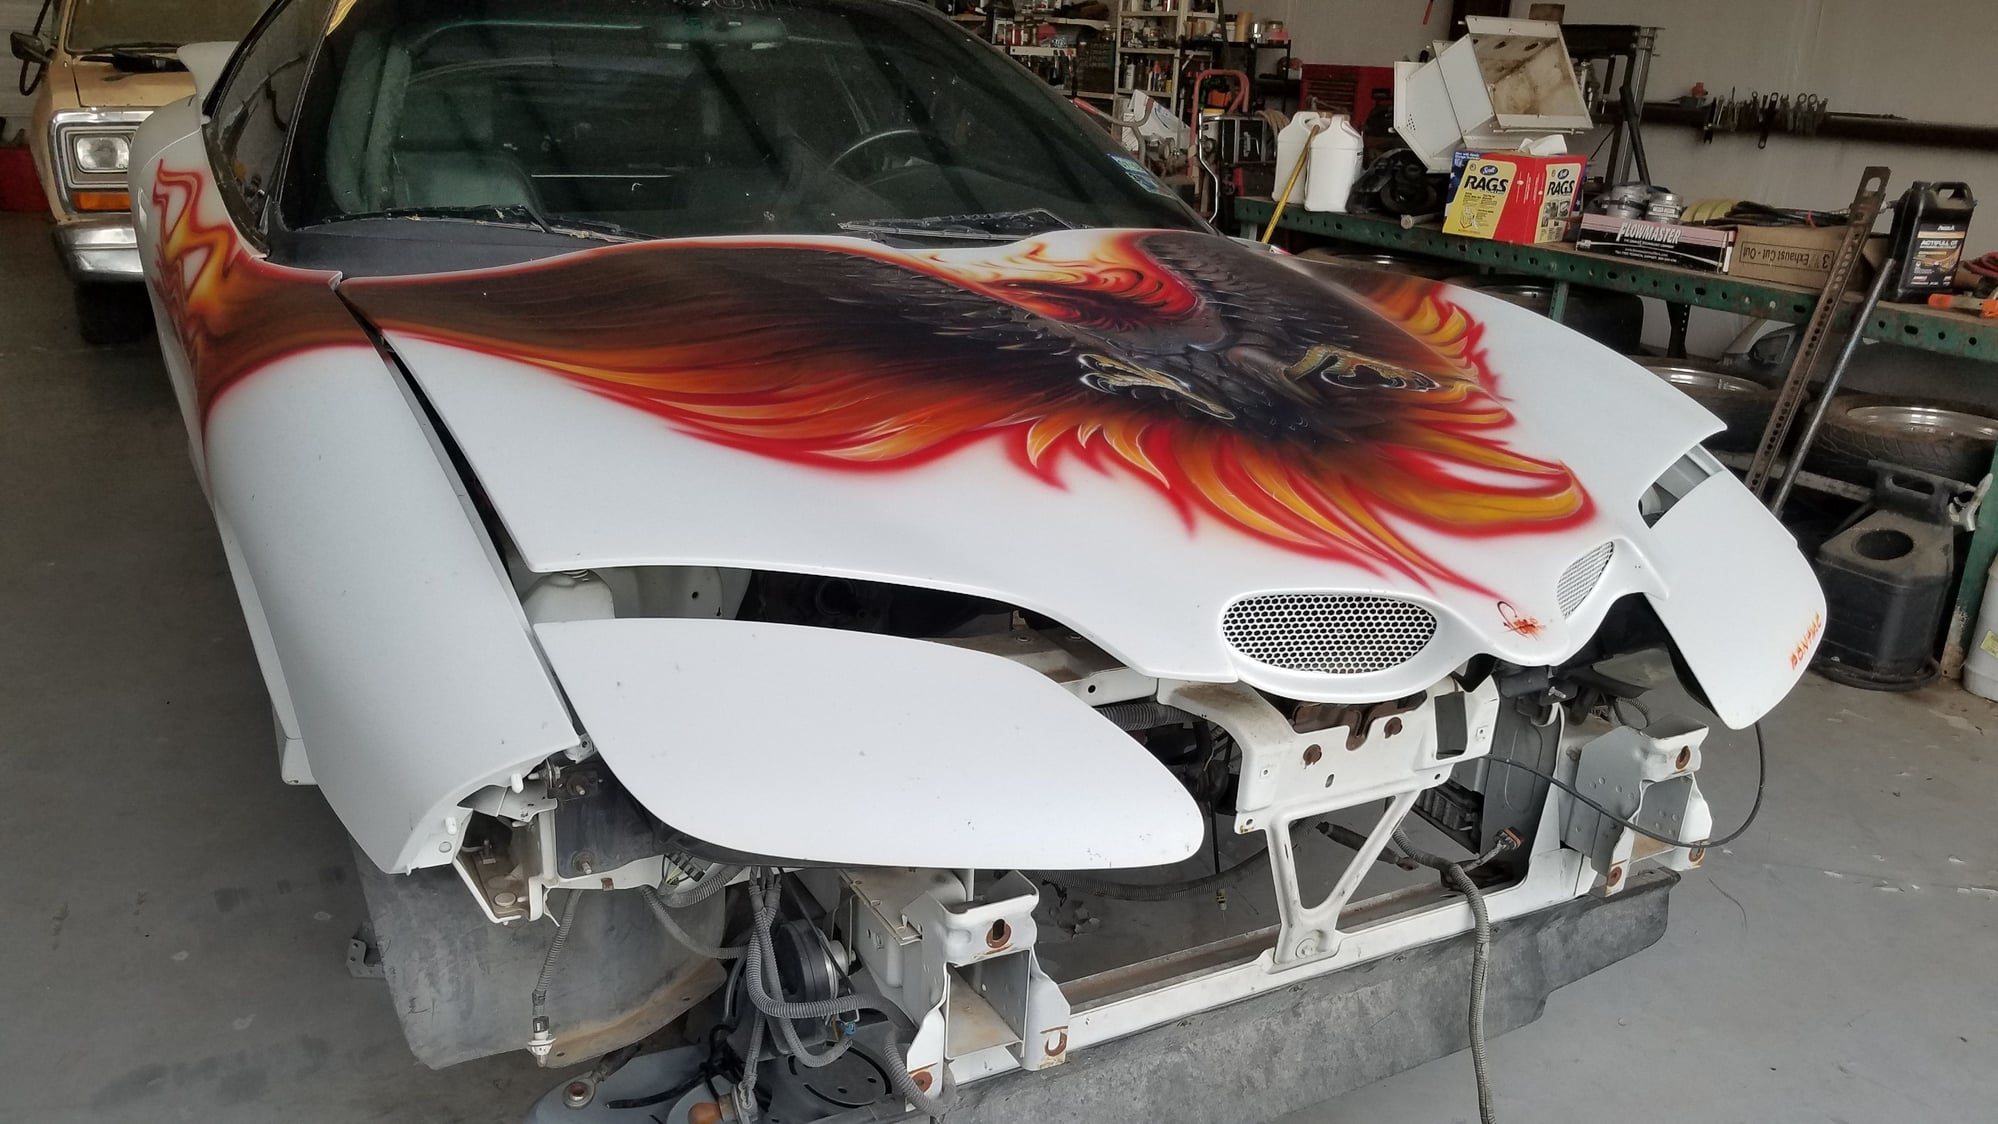 2001 Pontiac Firebird - 2001 WS.6 Trans-Am Roller - Used - VIN 2G2FV22G812112325 - 54,000 Miles - Other - 2WD - Automatic - White - Woodway, TX 76712, United States